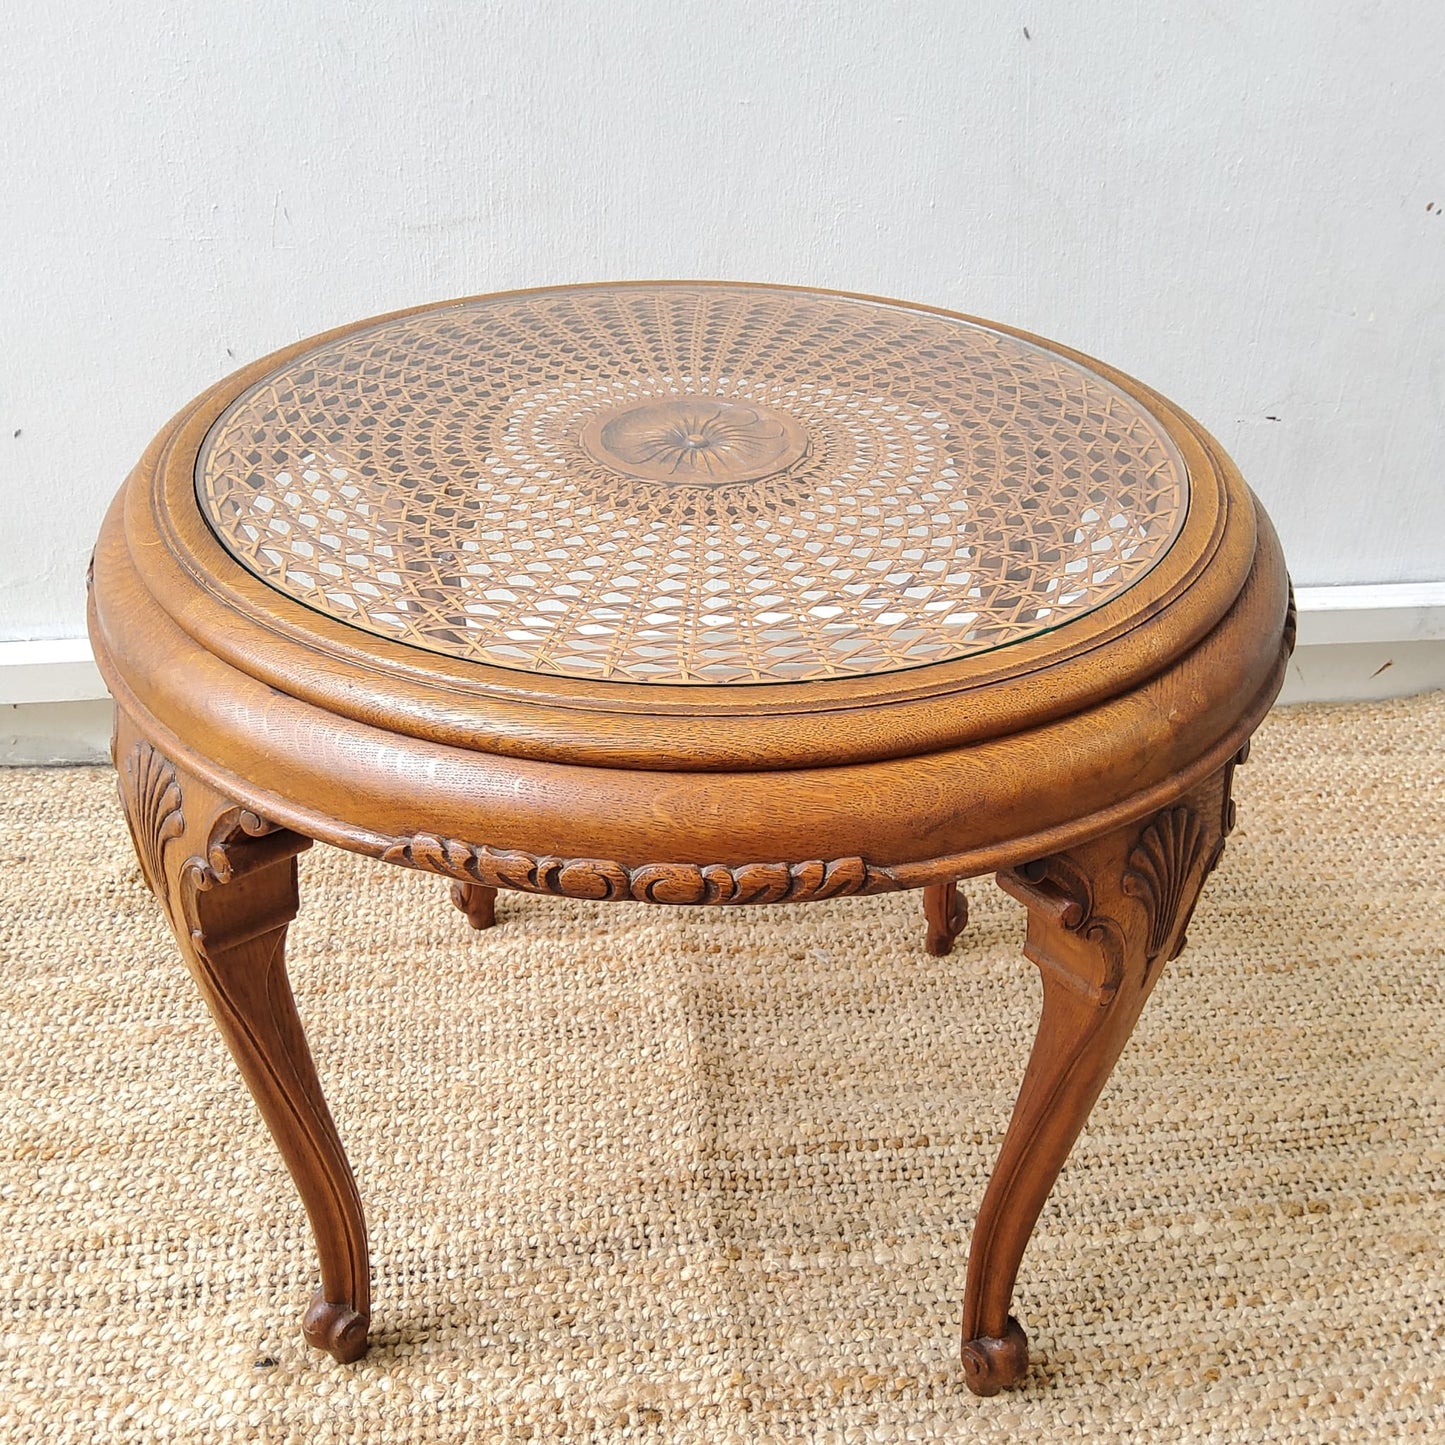 FRENCH HANDCARVED OAK ROUND COFFEE TABLE With CANE TOP